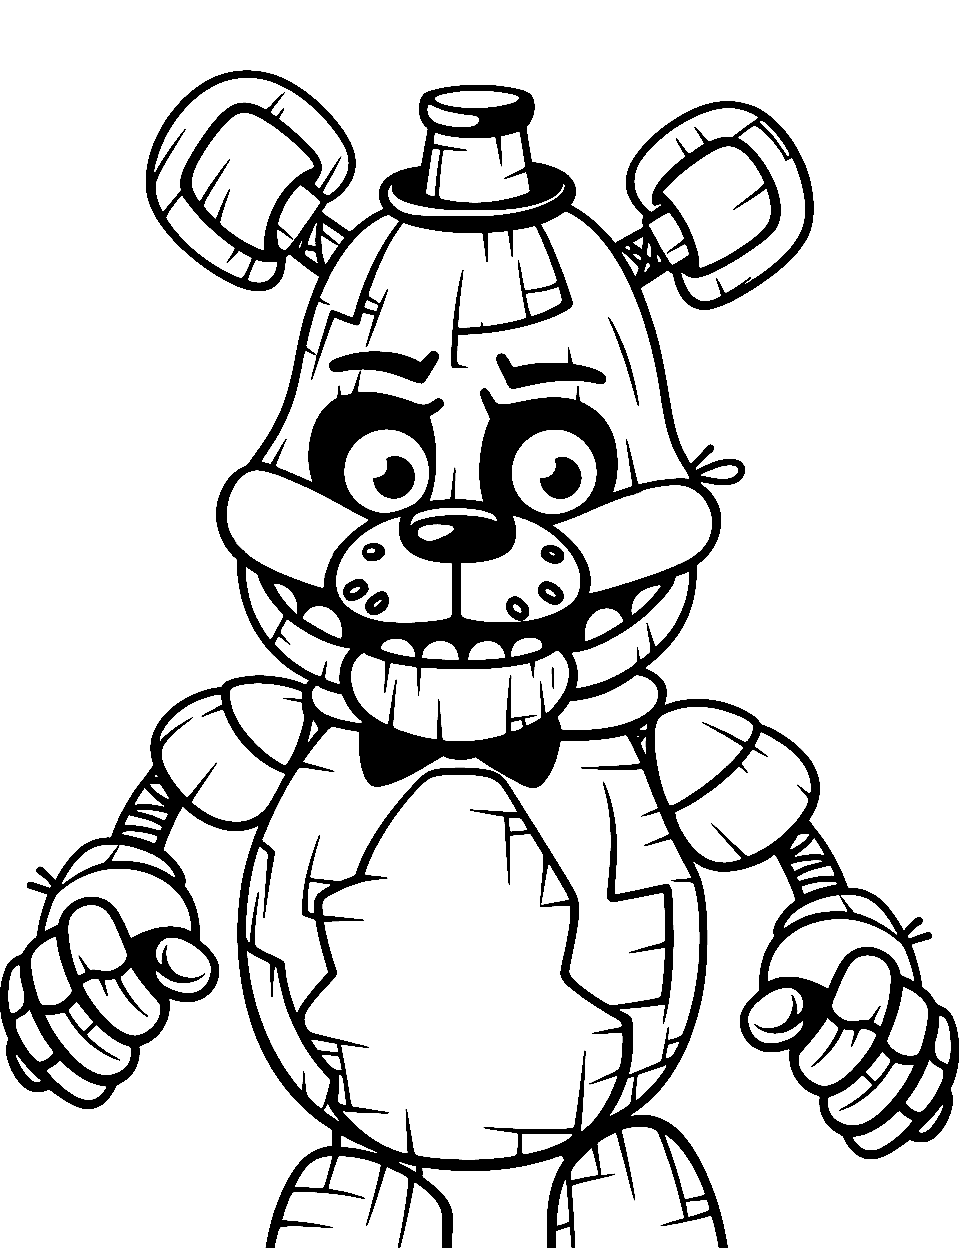 Springtrap’s Haunt Five Nights at Freddys Coloring Page - Springtrap lurking around looking to hunt players.